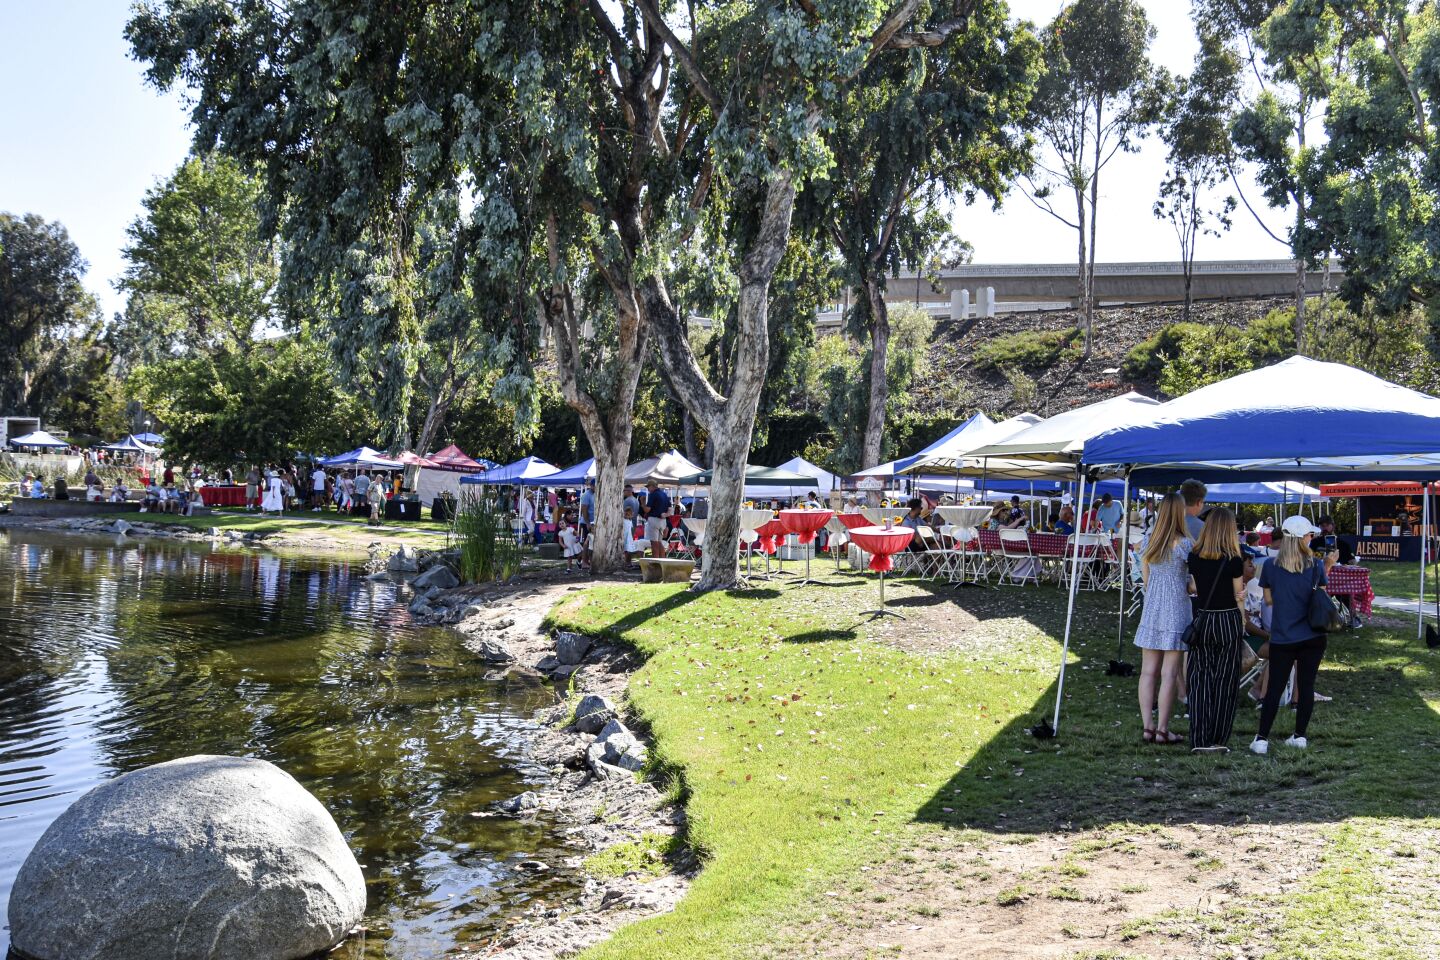 The Vines and Vittles booths lined the path that circled the picturesque Webb Lake in Rancho Bernardo.